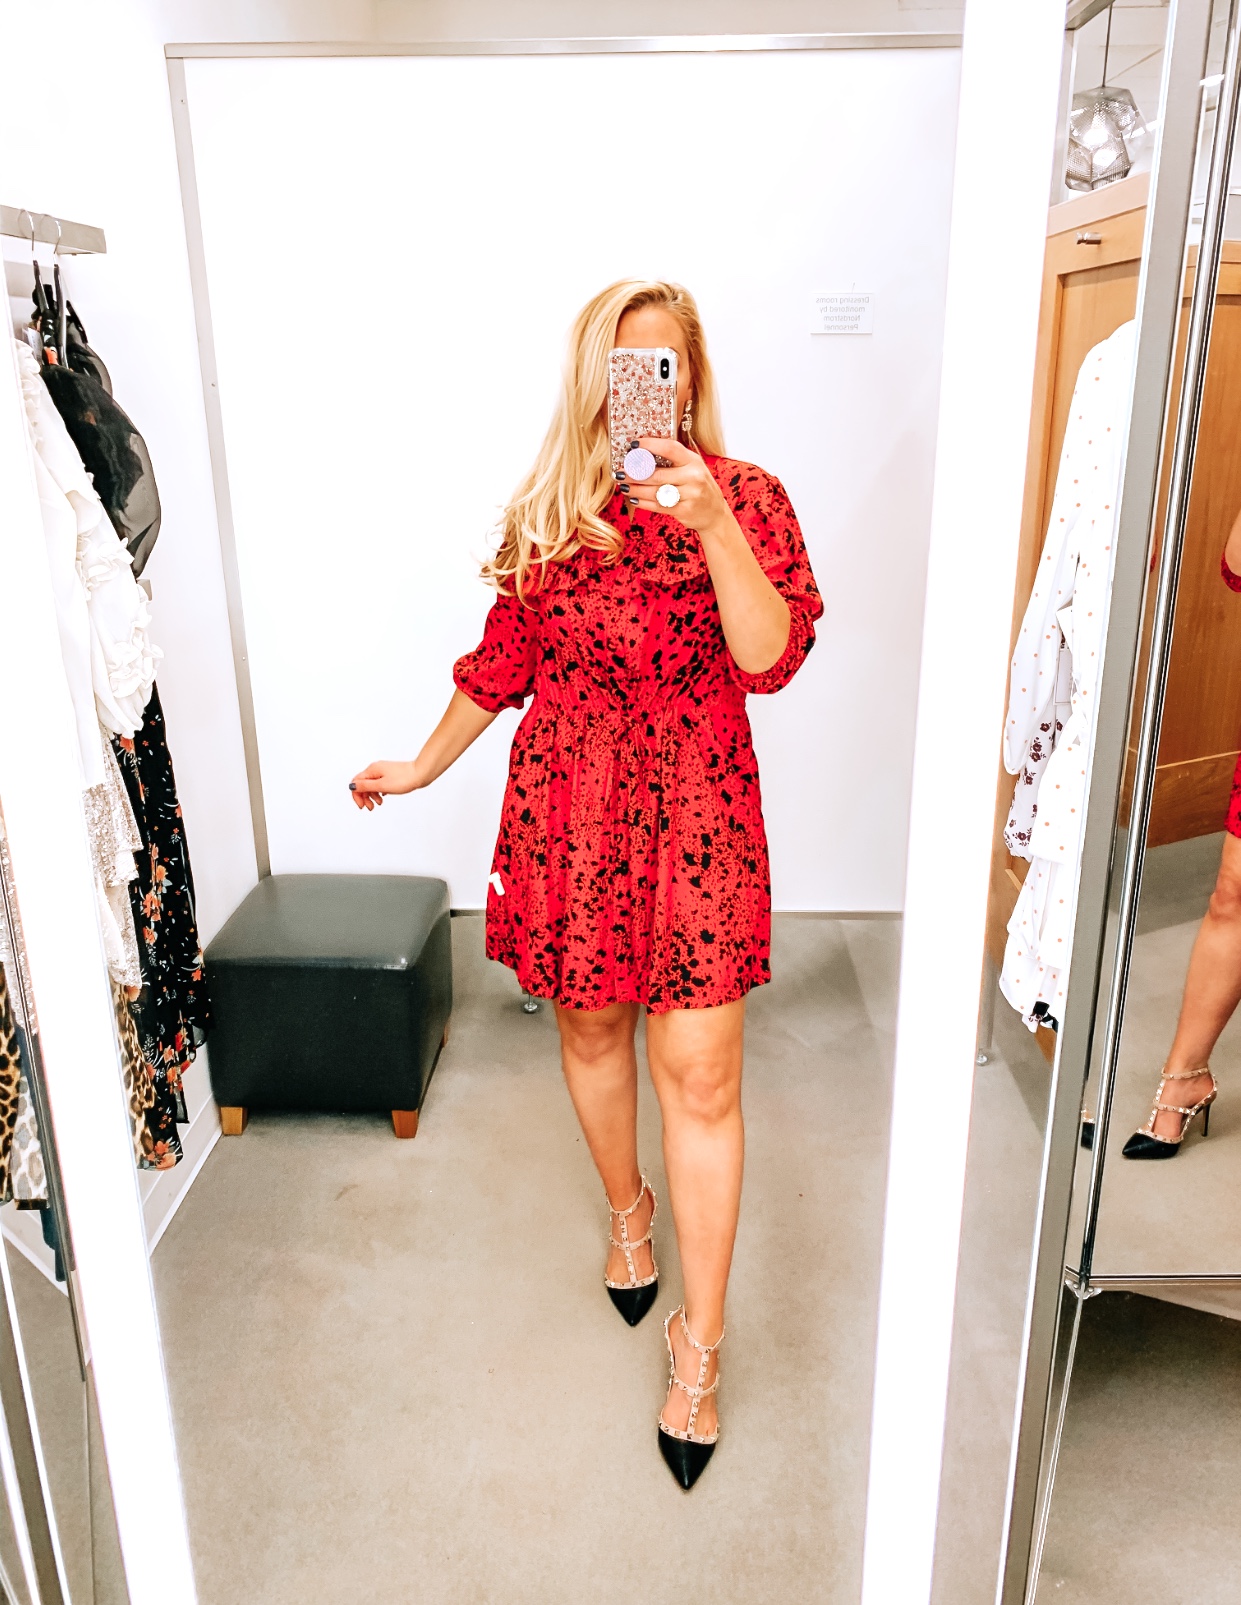 Tampa Blogger Jenn Truman providing a mirror selfie inside Nordstrom at Tampa International Plaza. She is wearing a TOPSHOP Animal Print Tie Waist Mini Shirtdress from Nordstrom and Valentino dupe black studded heels from Amazon. She is holding her phone for a mirror selfie.